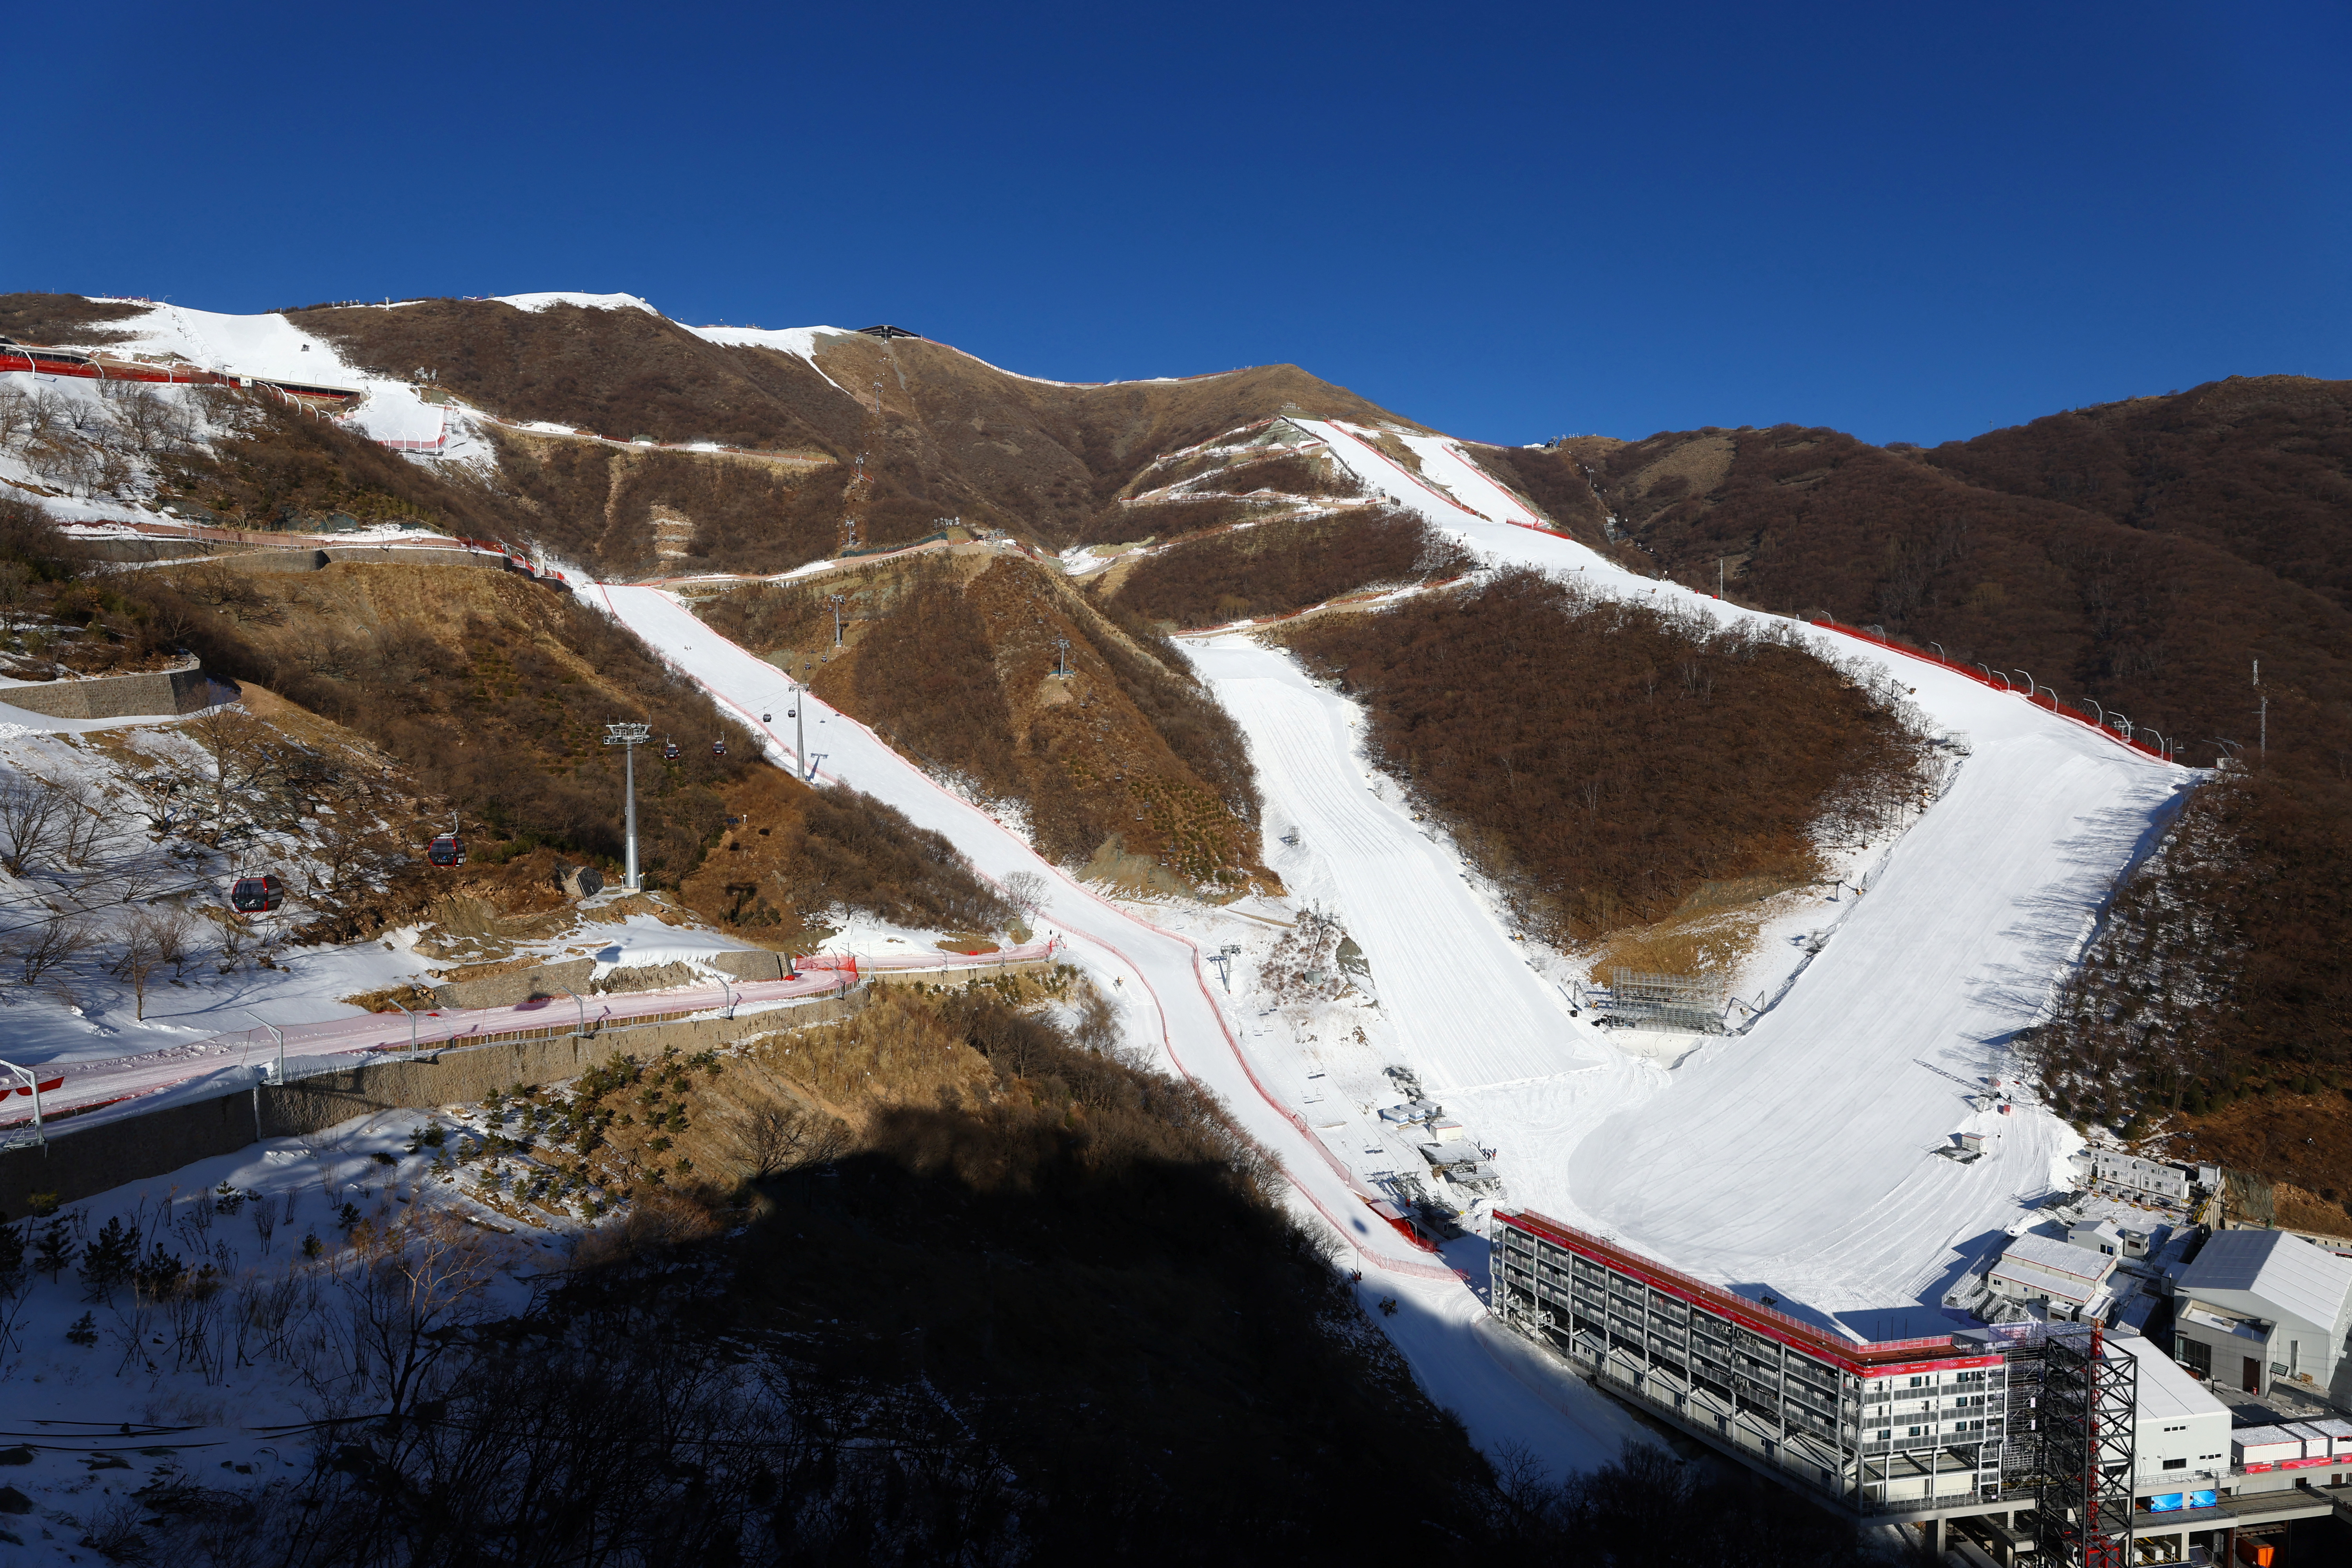 Yanqing Alpine Skiing Centre, a competition venue for Alpine Skiing during the Beijing 2022 Winter Olympics, is seen in Beijing, China January 14, 2022. REUTERS/Pawel Kopczynski